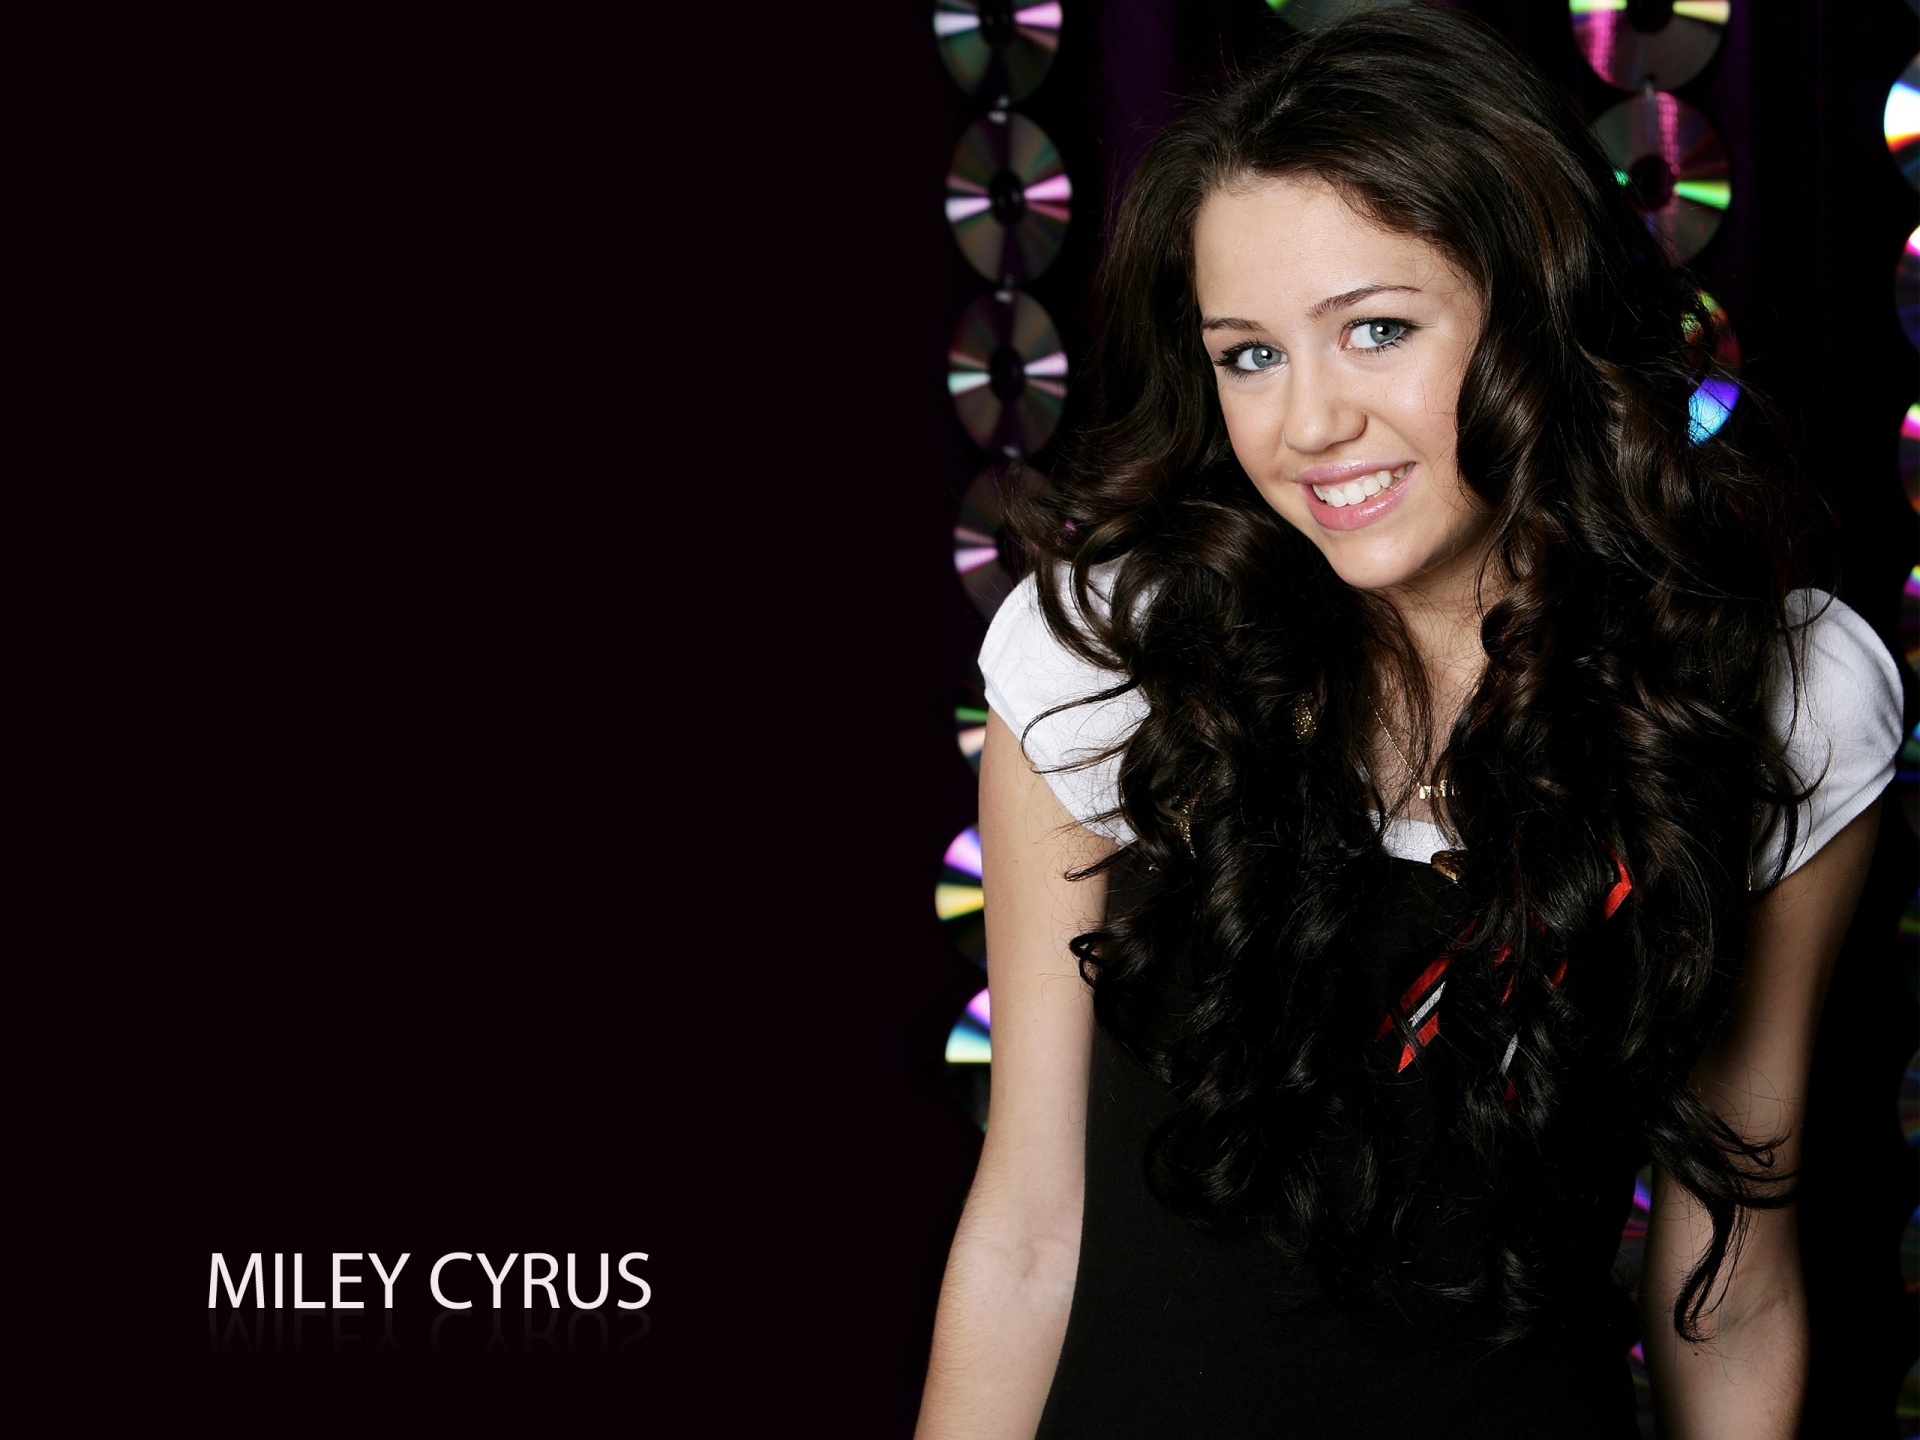 miley cyrus wallpapers hd A12